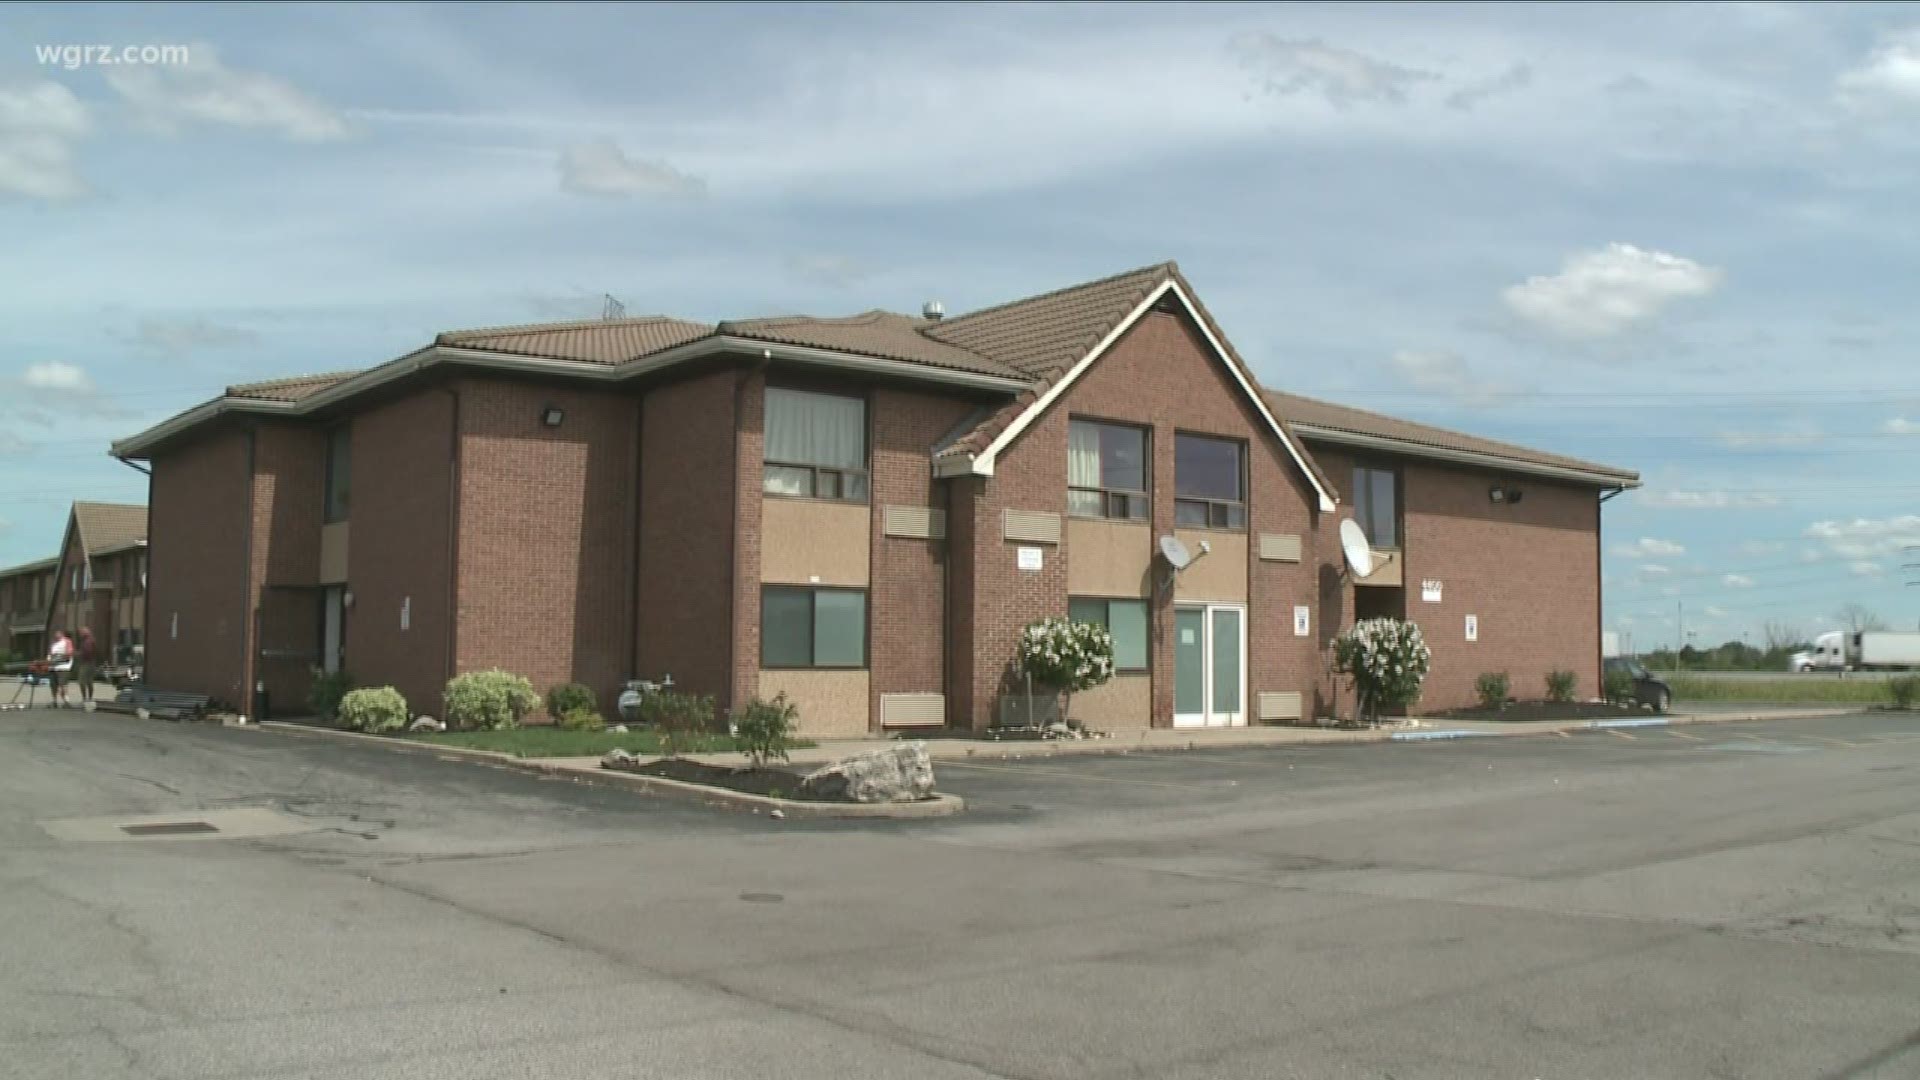 local hotelier Kisher Patel paid more than 2-point-7 million dollars for the Motel six on Maple Road...